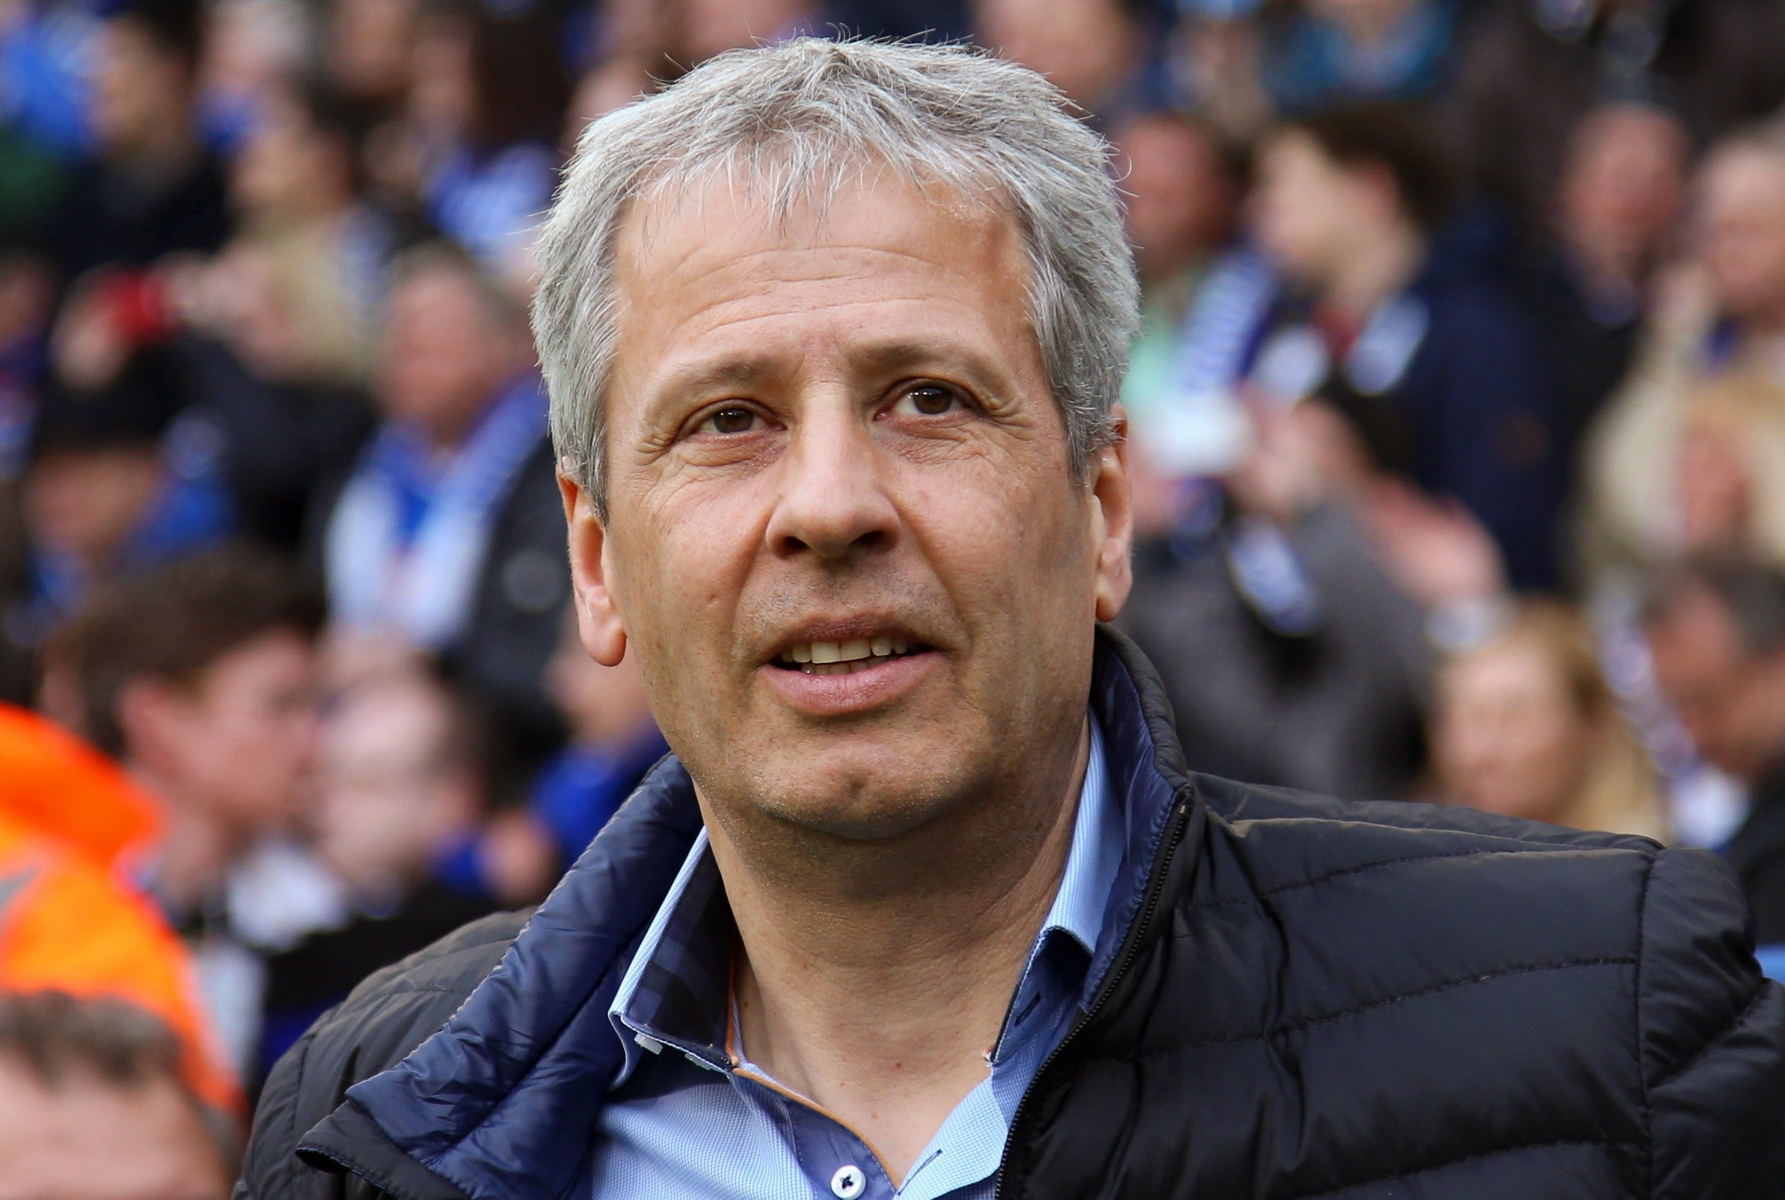 ZUR MELDUNG, DASS LUCIEN FAVRE NEUER TRAINER BEIM LIGUE-1-KLUB NICE (NIZZA) WIRD, STELLEN WIR IHNEN FOLGENDES ARCHIVBILD ZUR VERFUEGUNG - Moenchengladbach's Swiss head coach Lucien Favre before the German DFB Cup quarter final soccer match between Arminia Bielefeld and Borussia Moenchengladbach in Bielefeld, Germany, 08 April 2015. ....(ATTENTION: The DFB prohibits the utilisation and publication of sequential pictures on the internet and other online media during the match (including half-time). ATTENTION: BLOCKING PERIOD! The DFB permits the further utilisation and publication of the pictures for mobile services (especially MMS) and for DVB-H and DMB only after the end of the match.)  EPA/FRISO GENTSCH FUSSBALL LUCIEN FAVRE NIZZA